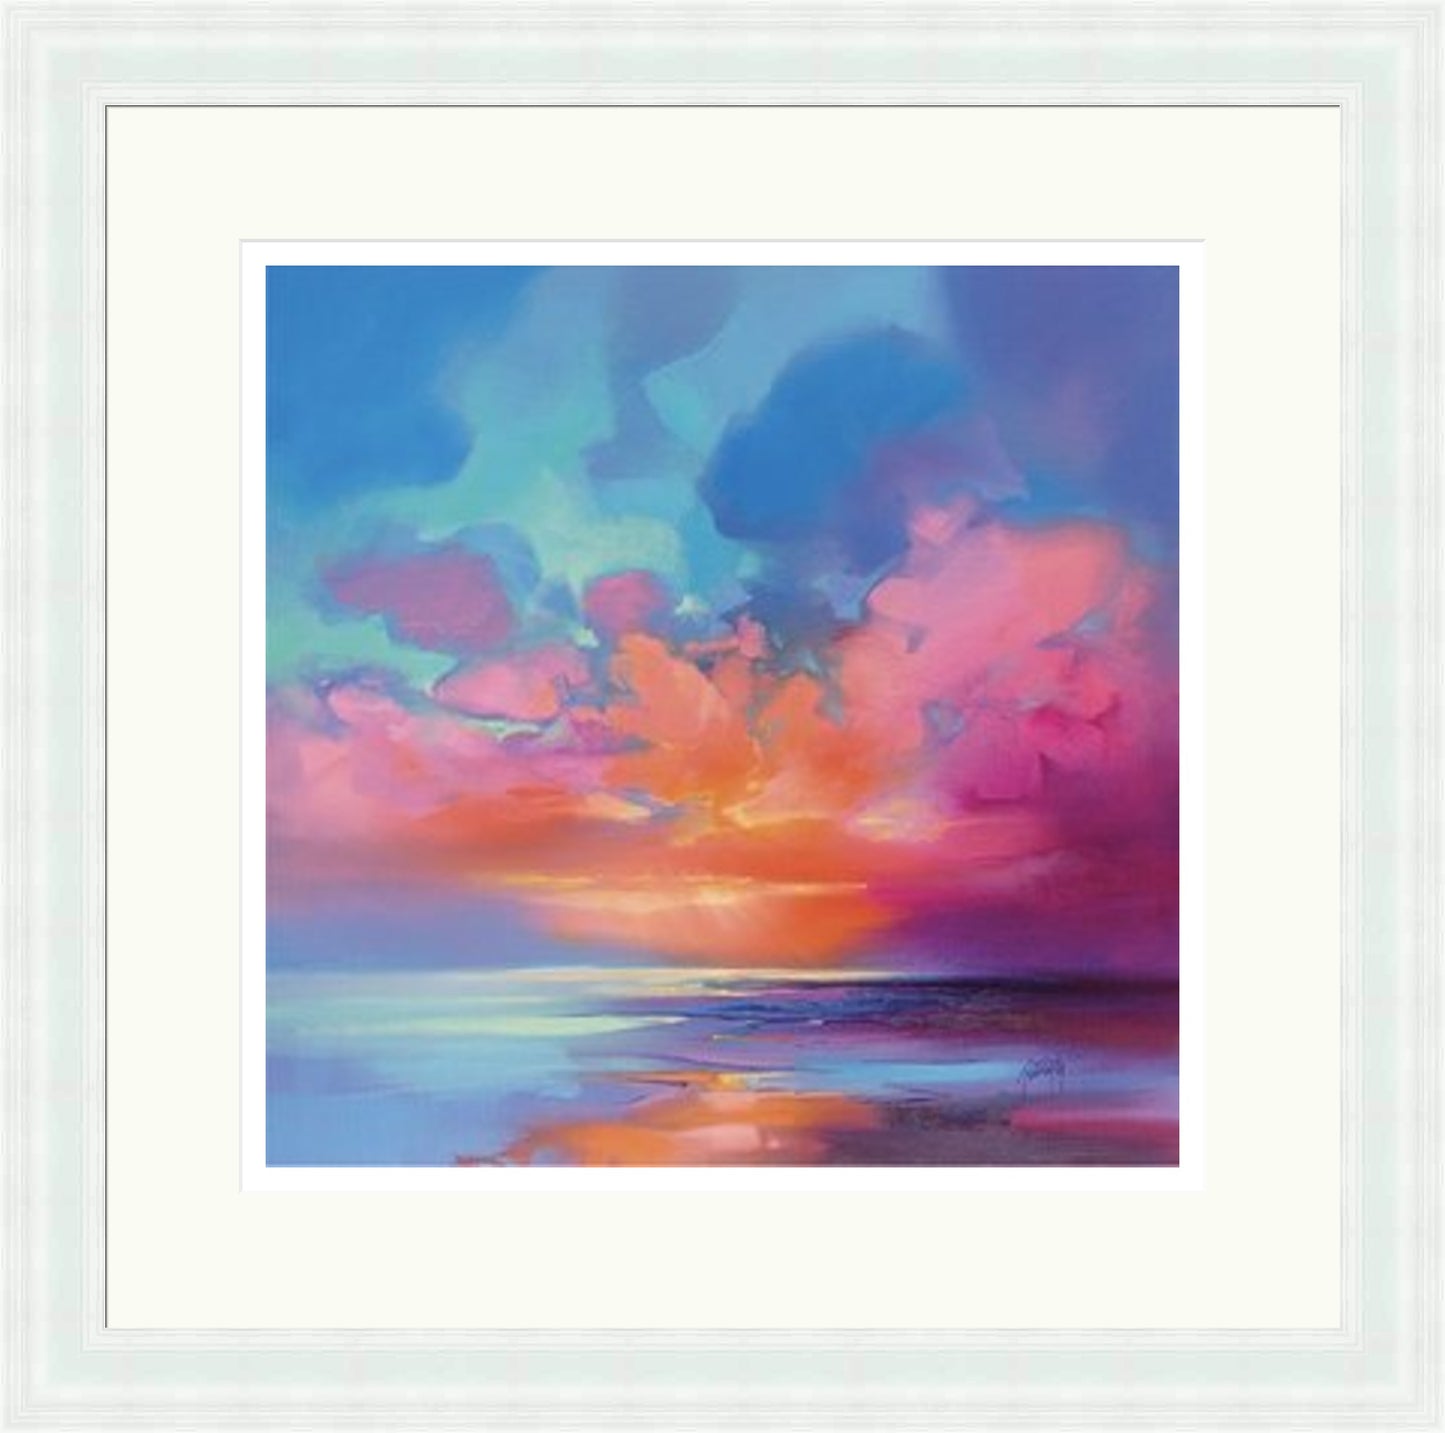 Creation of Blue 2 by Scott Naismith